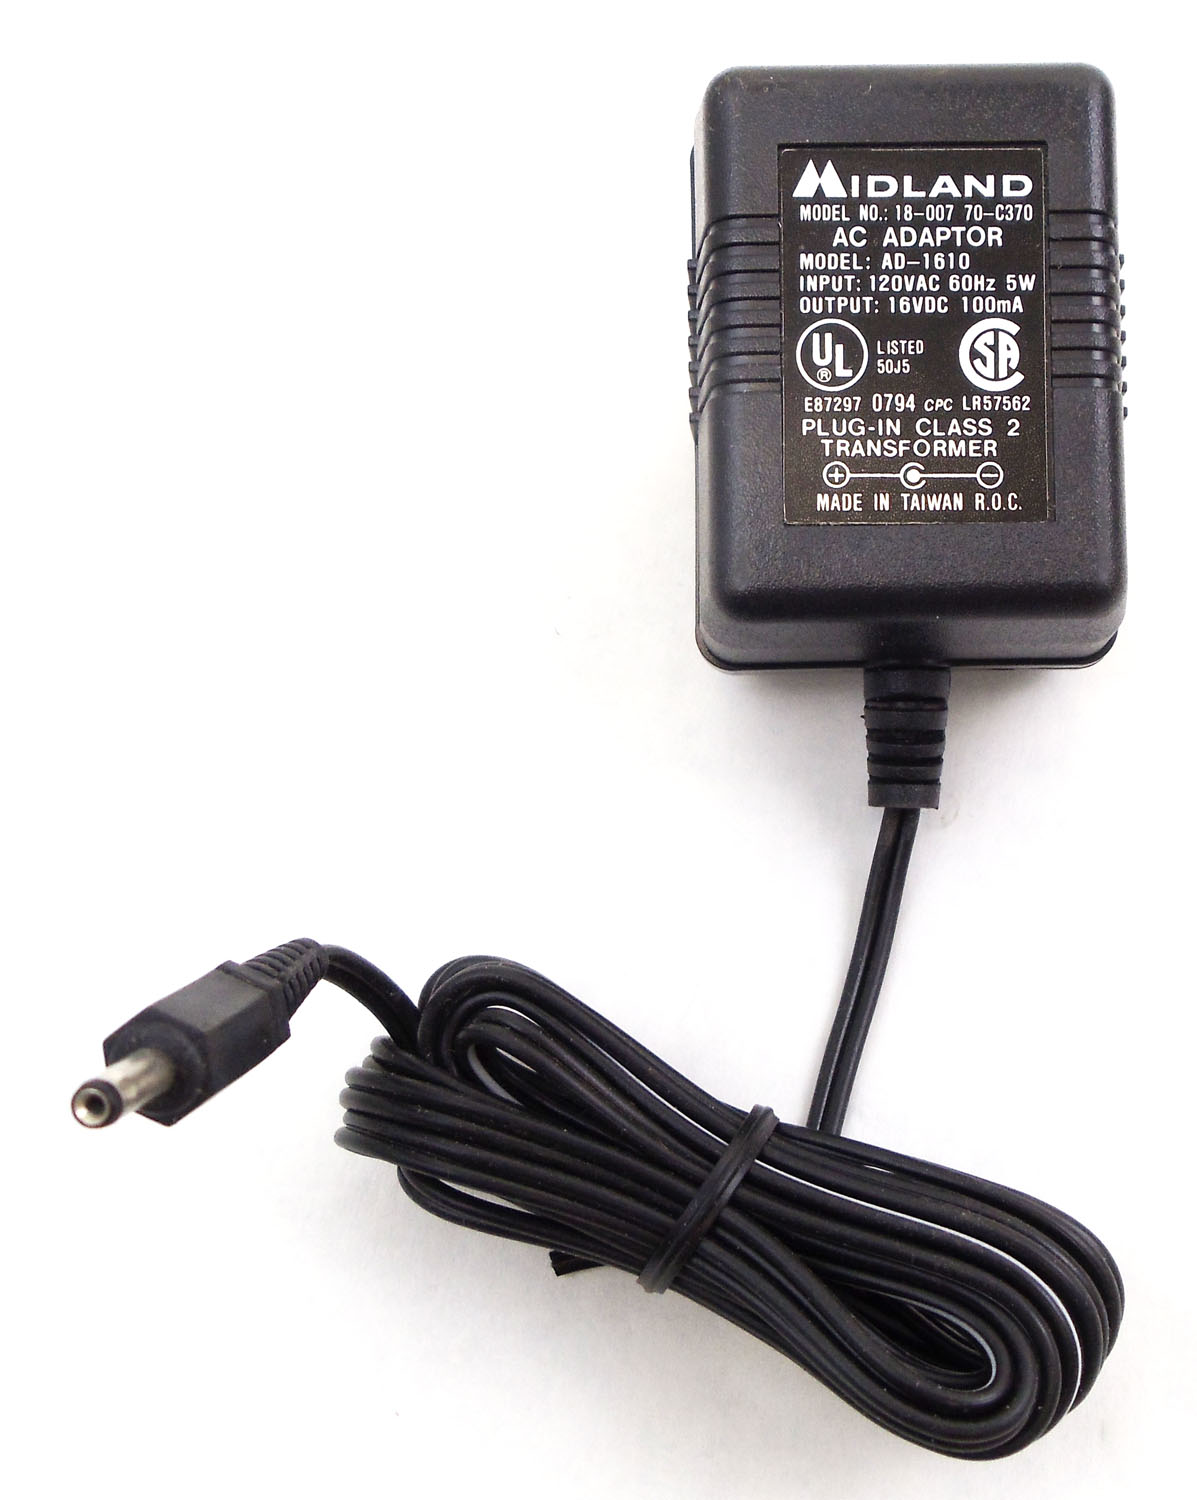 Wall Charger For 18005